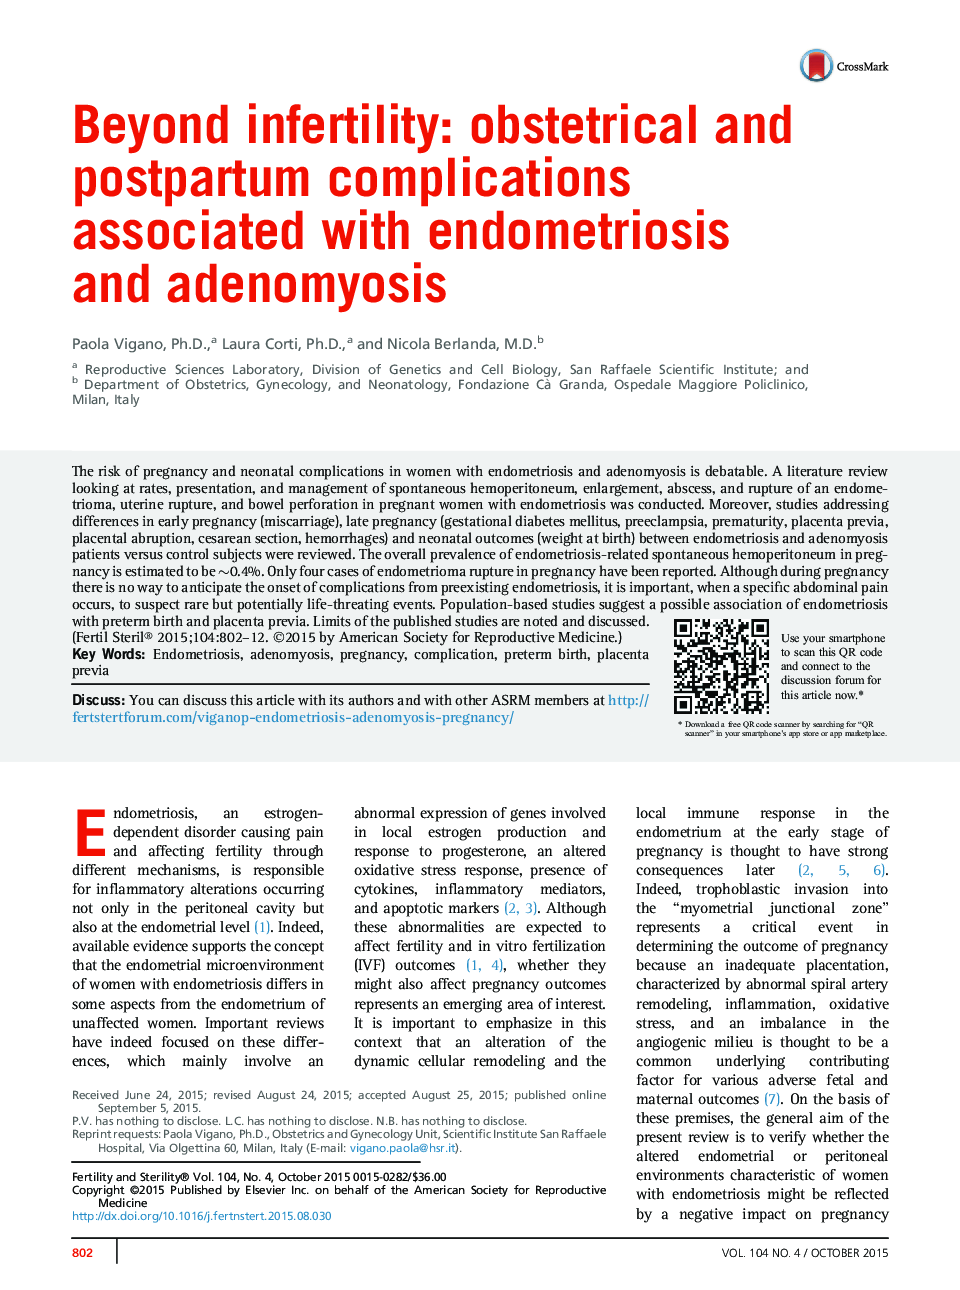 Beyond infertility: obstetrical and postpartum complications associated with endometriosis and adenomyosis 